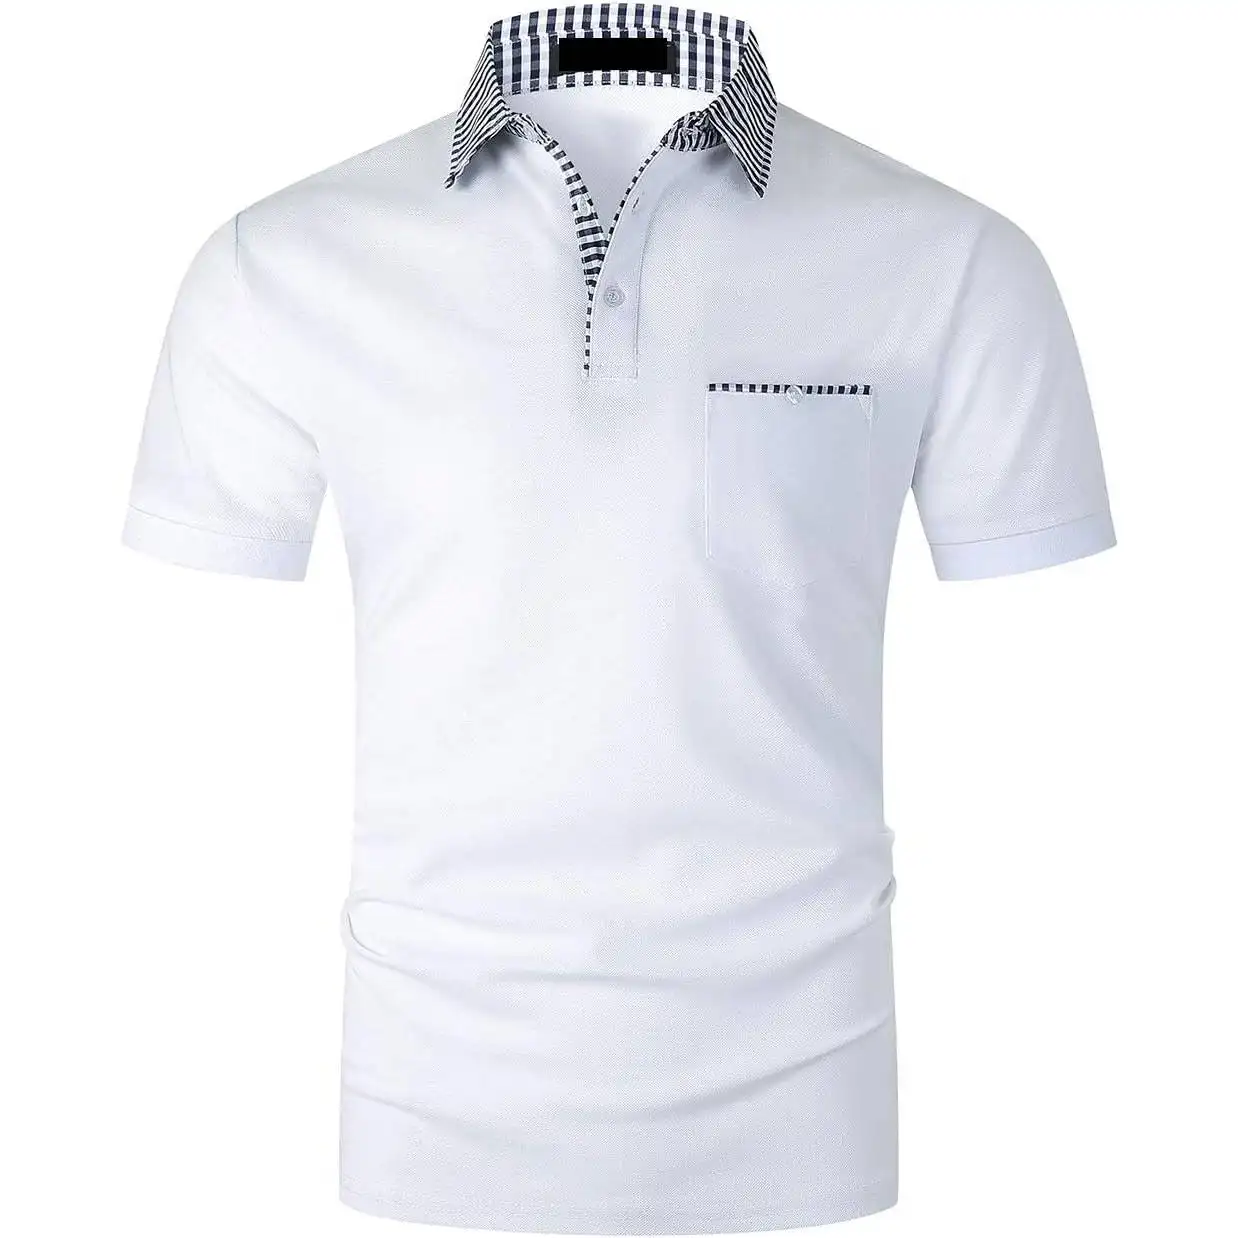 Cheap Price - Wholesale Men Custom Short Sleeve Polo Shirt with embroidering high quality OEM service FREE TAX